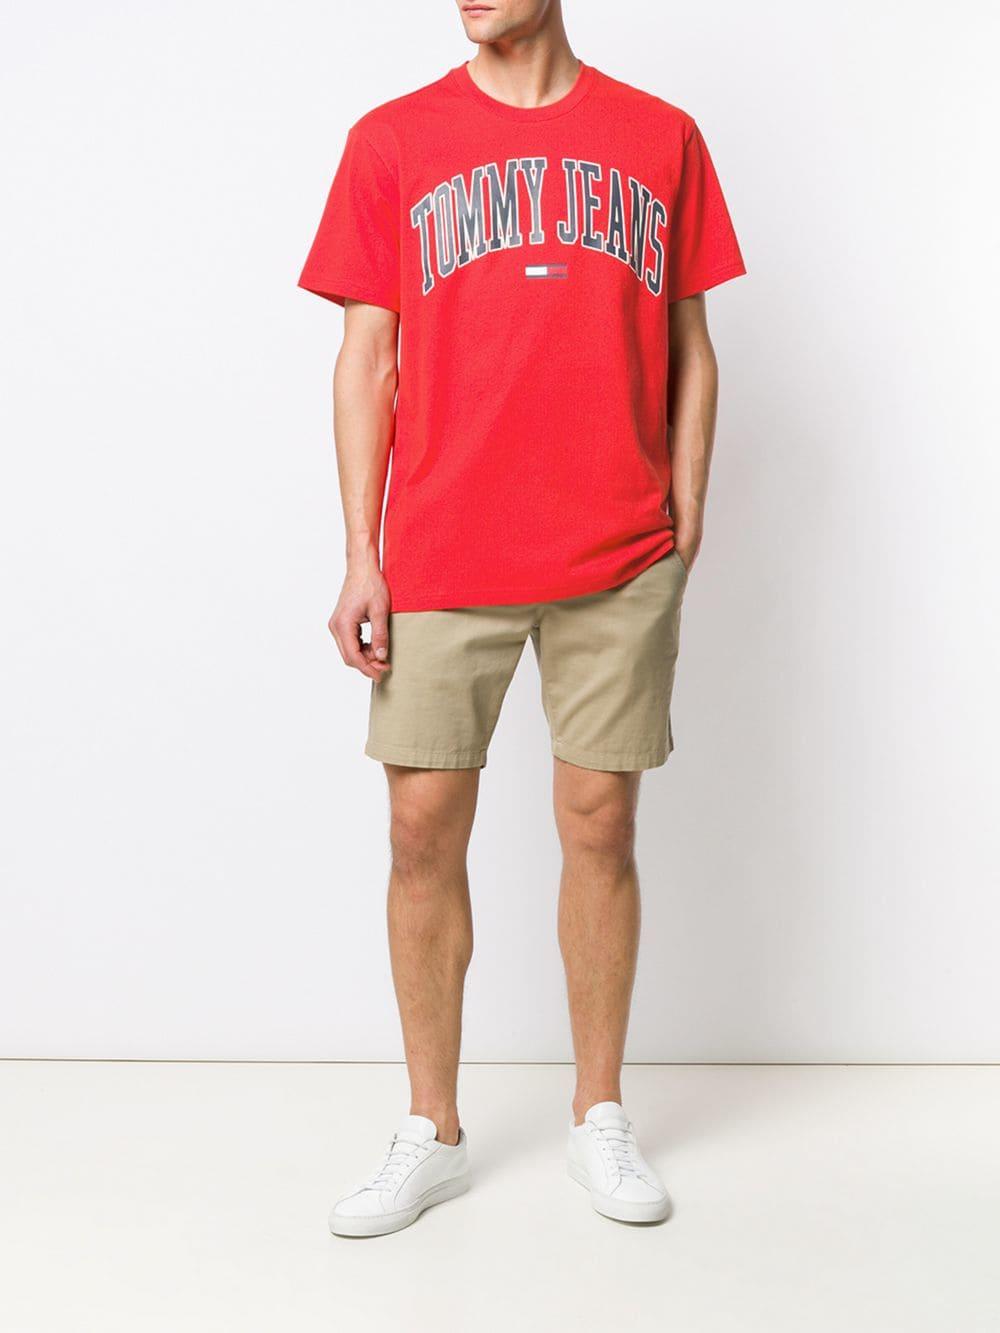 Tommy Hilfiger Logo Print T-shirt in Red for Men - Lyst